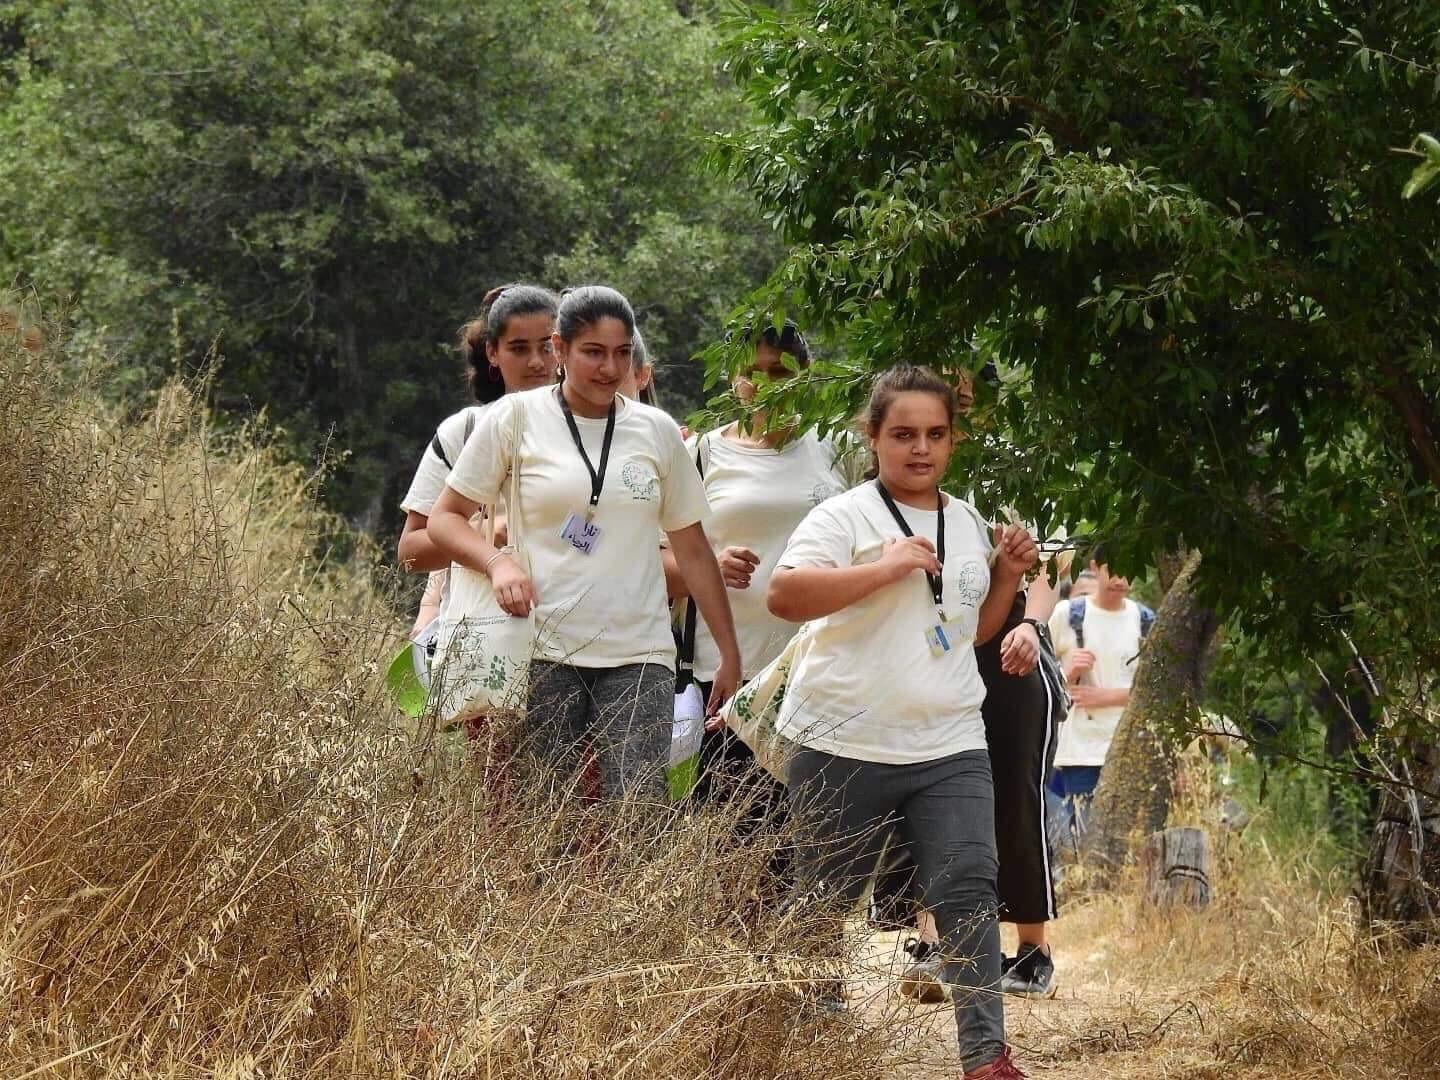 Students from schools in the West Bank take part in the August 2019 training workshop on environmental leadership. Photo: Adrainne Gray